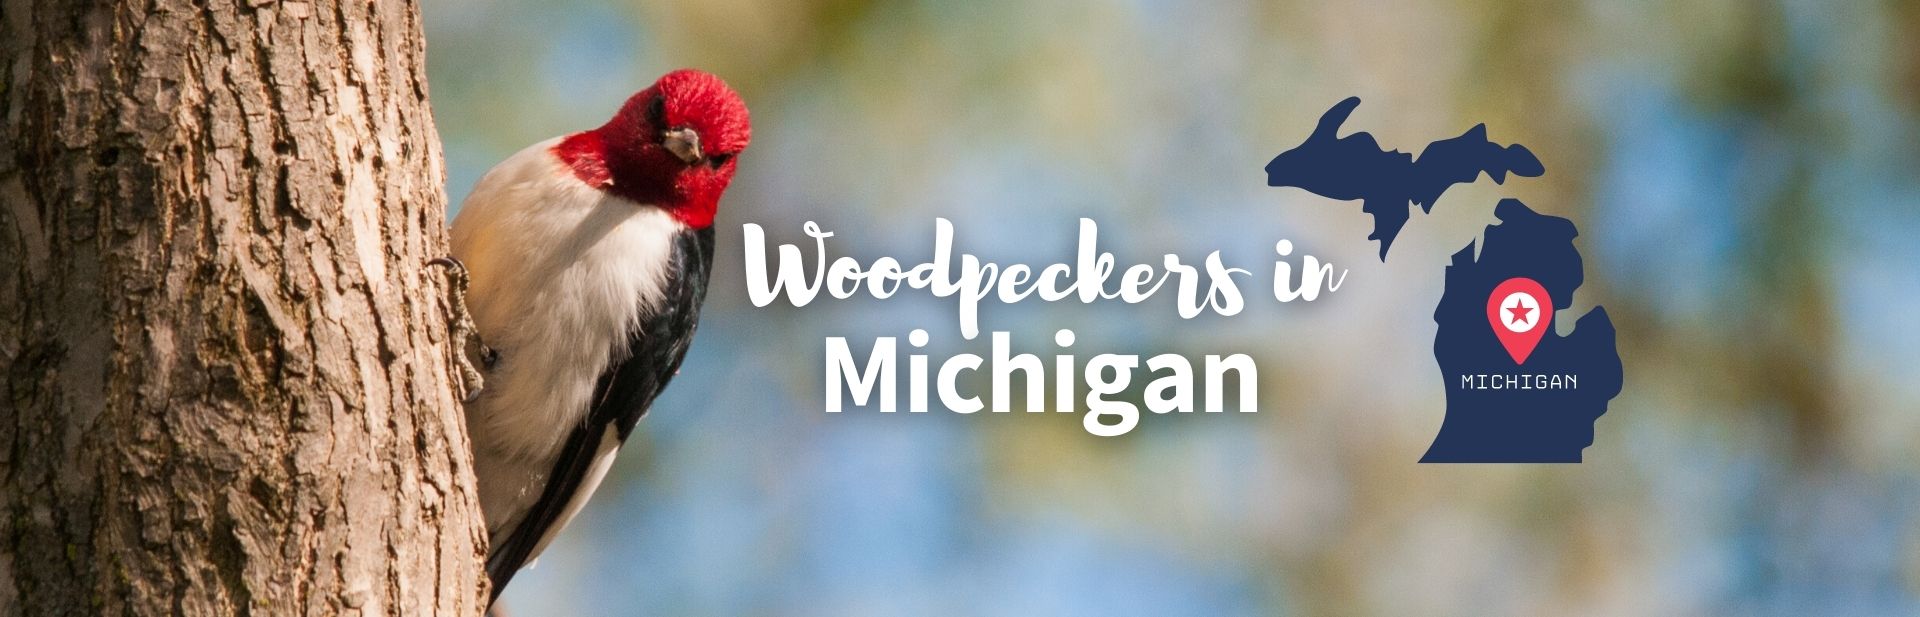 All About The 8 Types of Woodpeckers in Michigan! (ID Guide and Pictures)